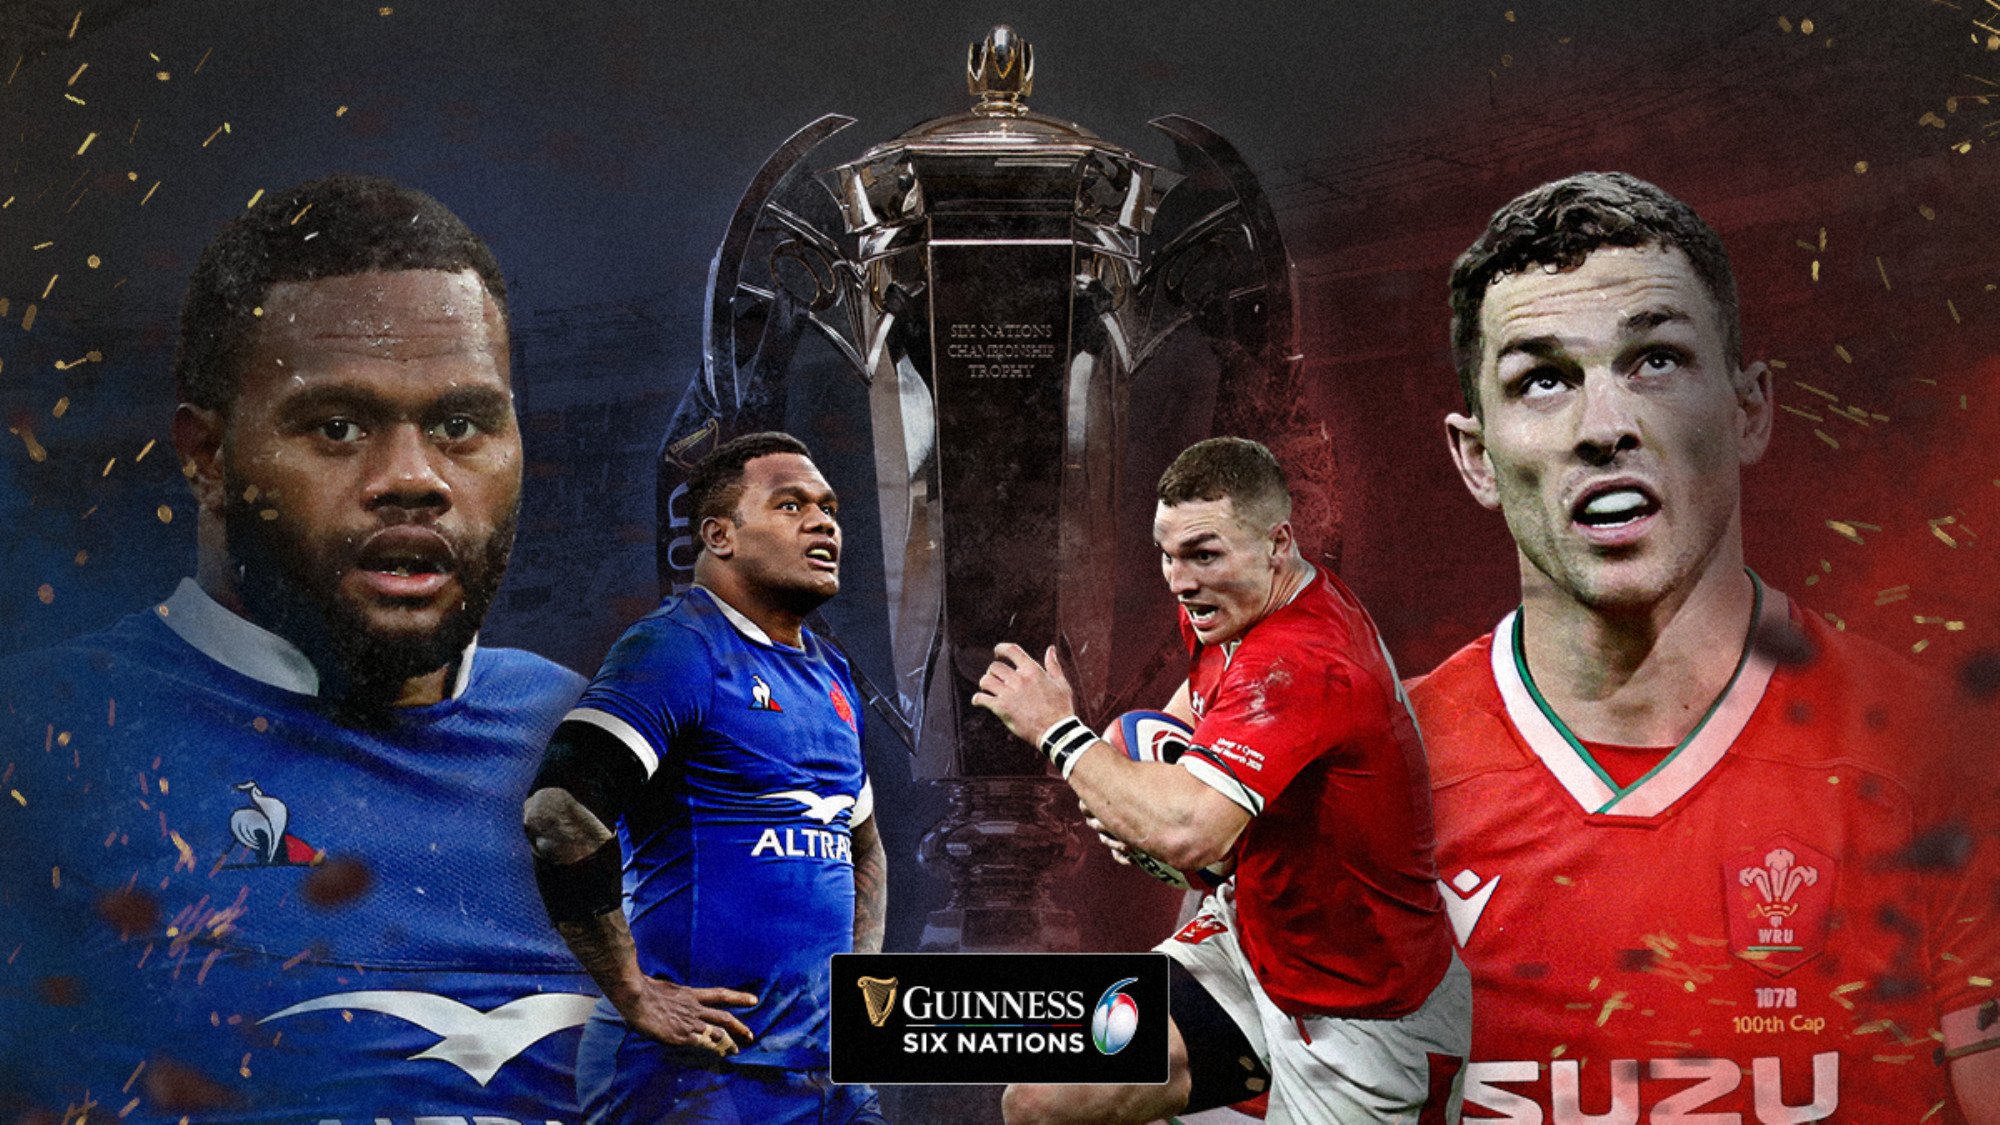 France vs Wales live stream: How to watch 2021 Six Nations rugby online